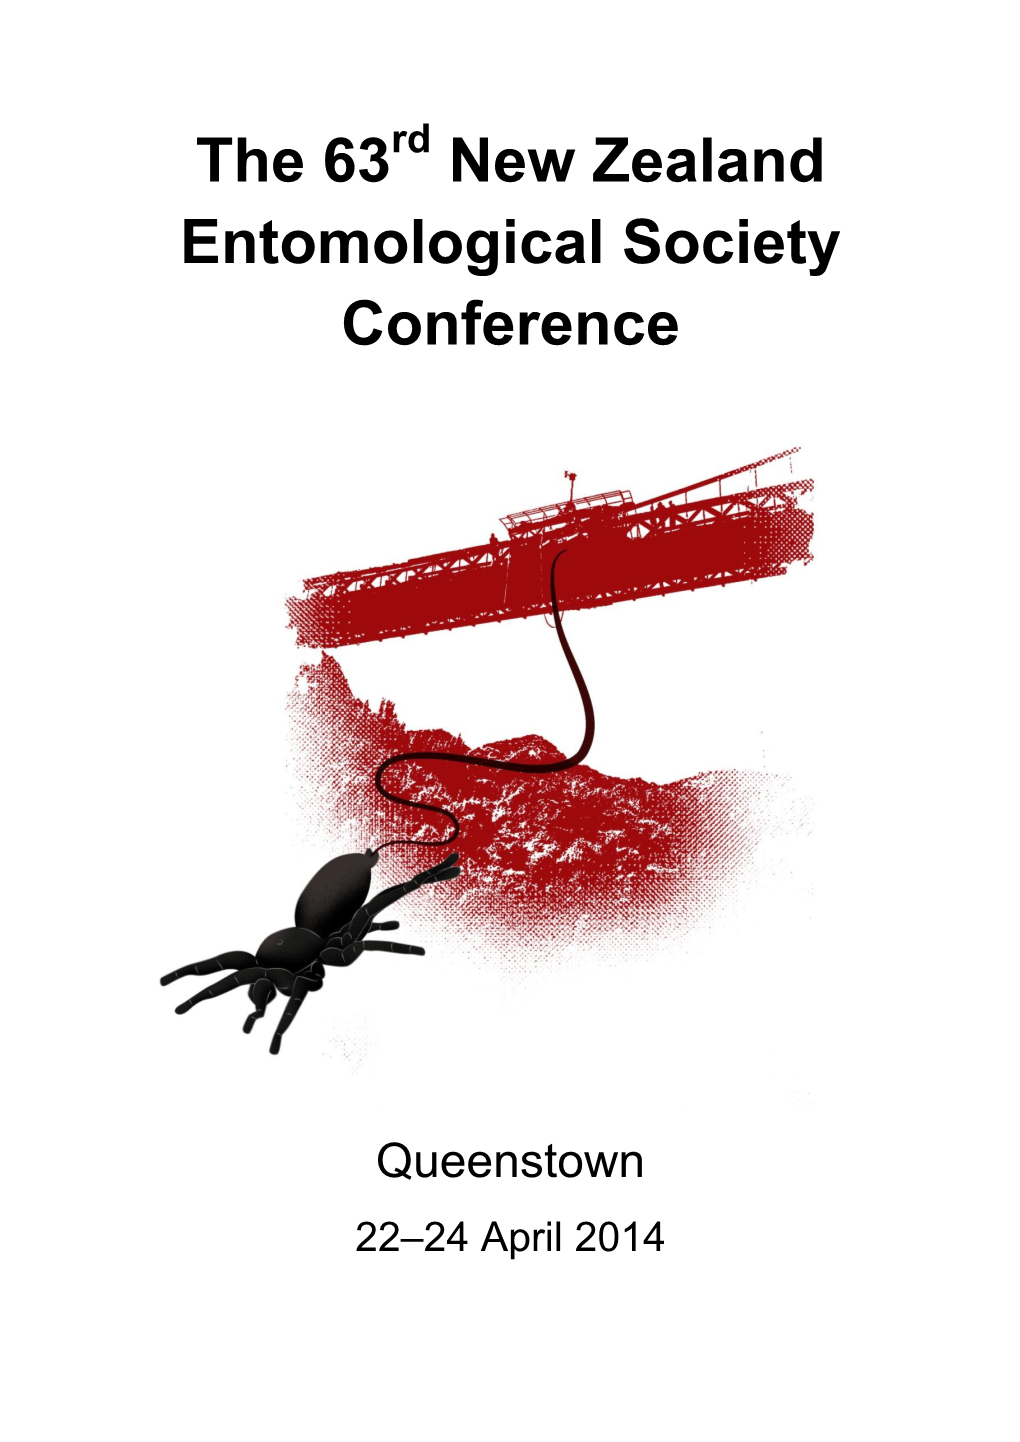 The 63 New Zealand Entomological Society Conference